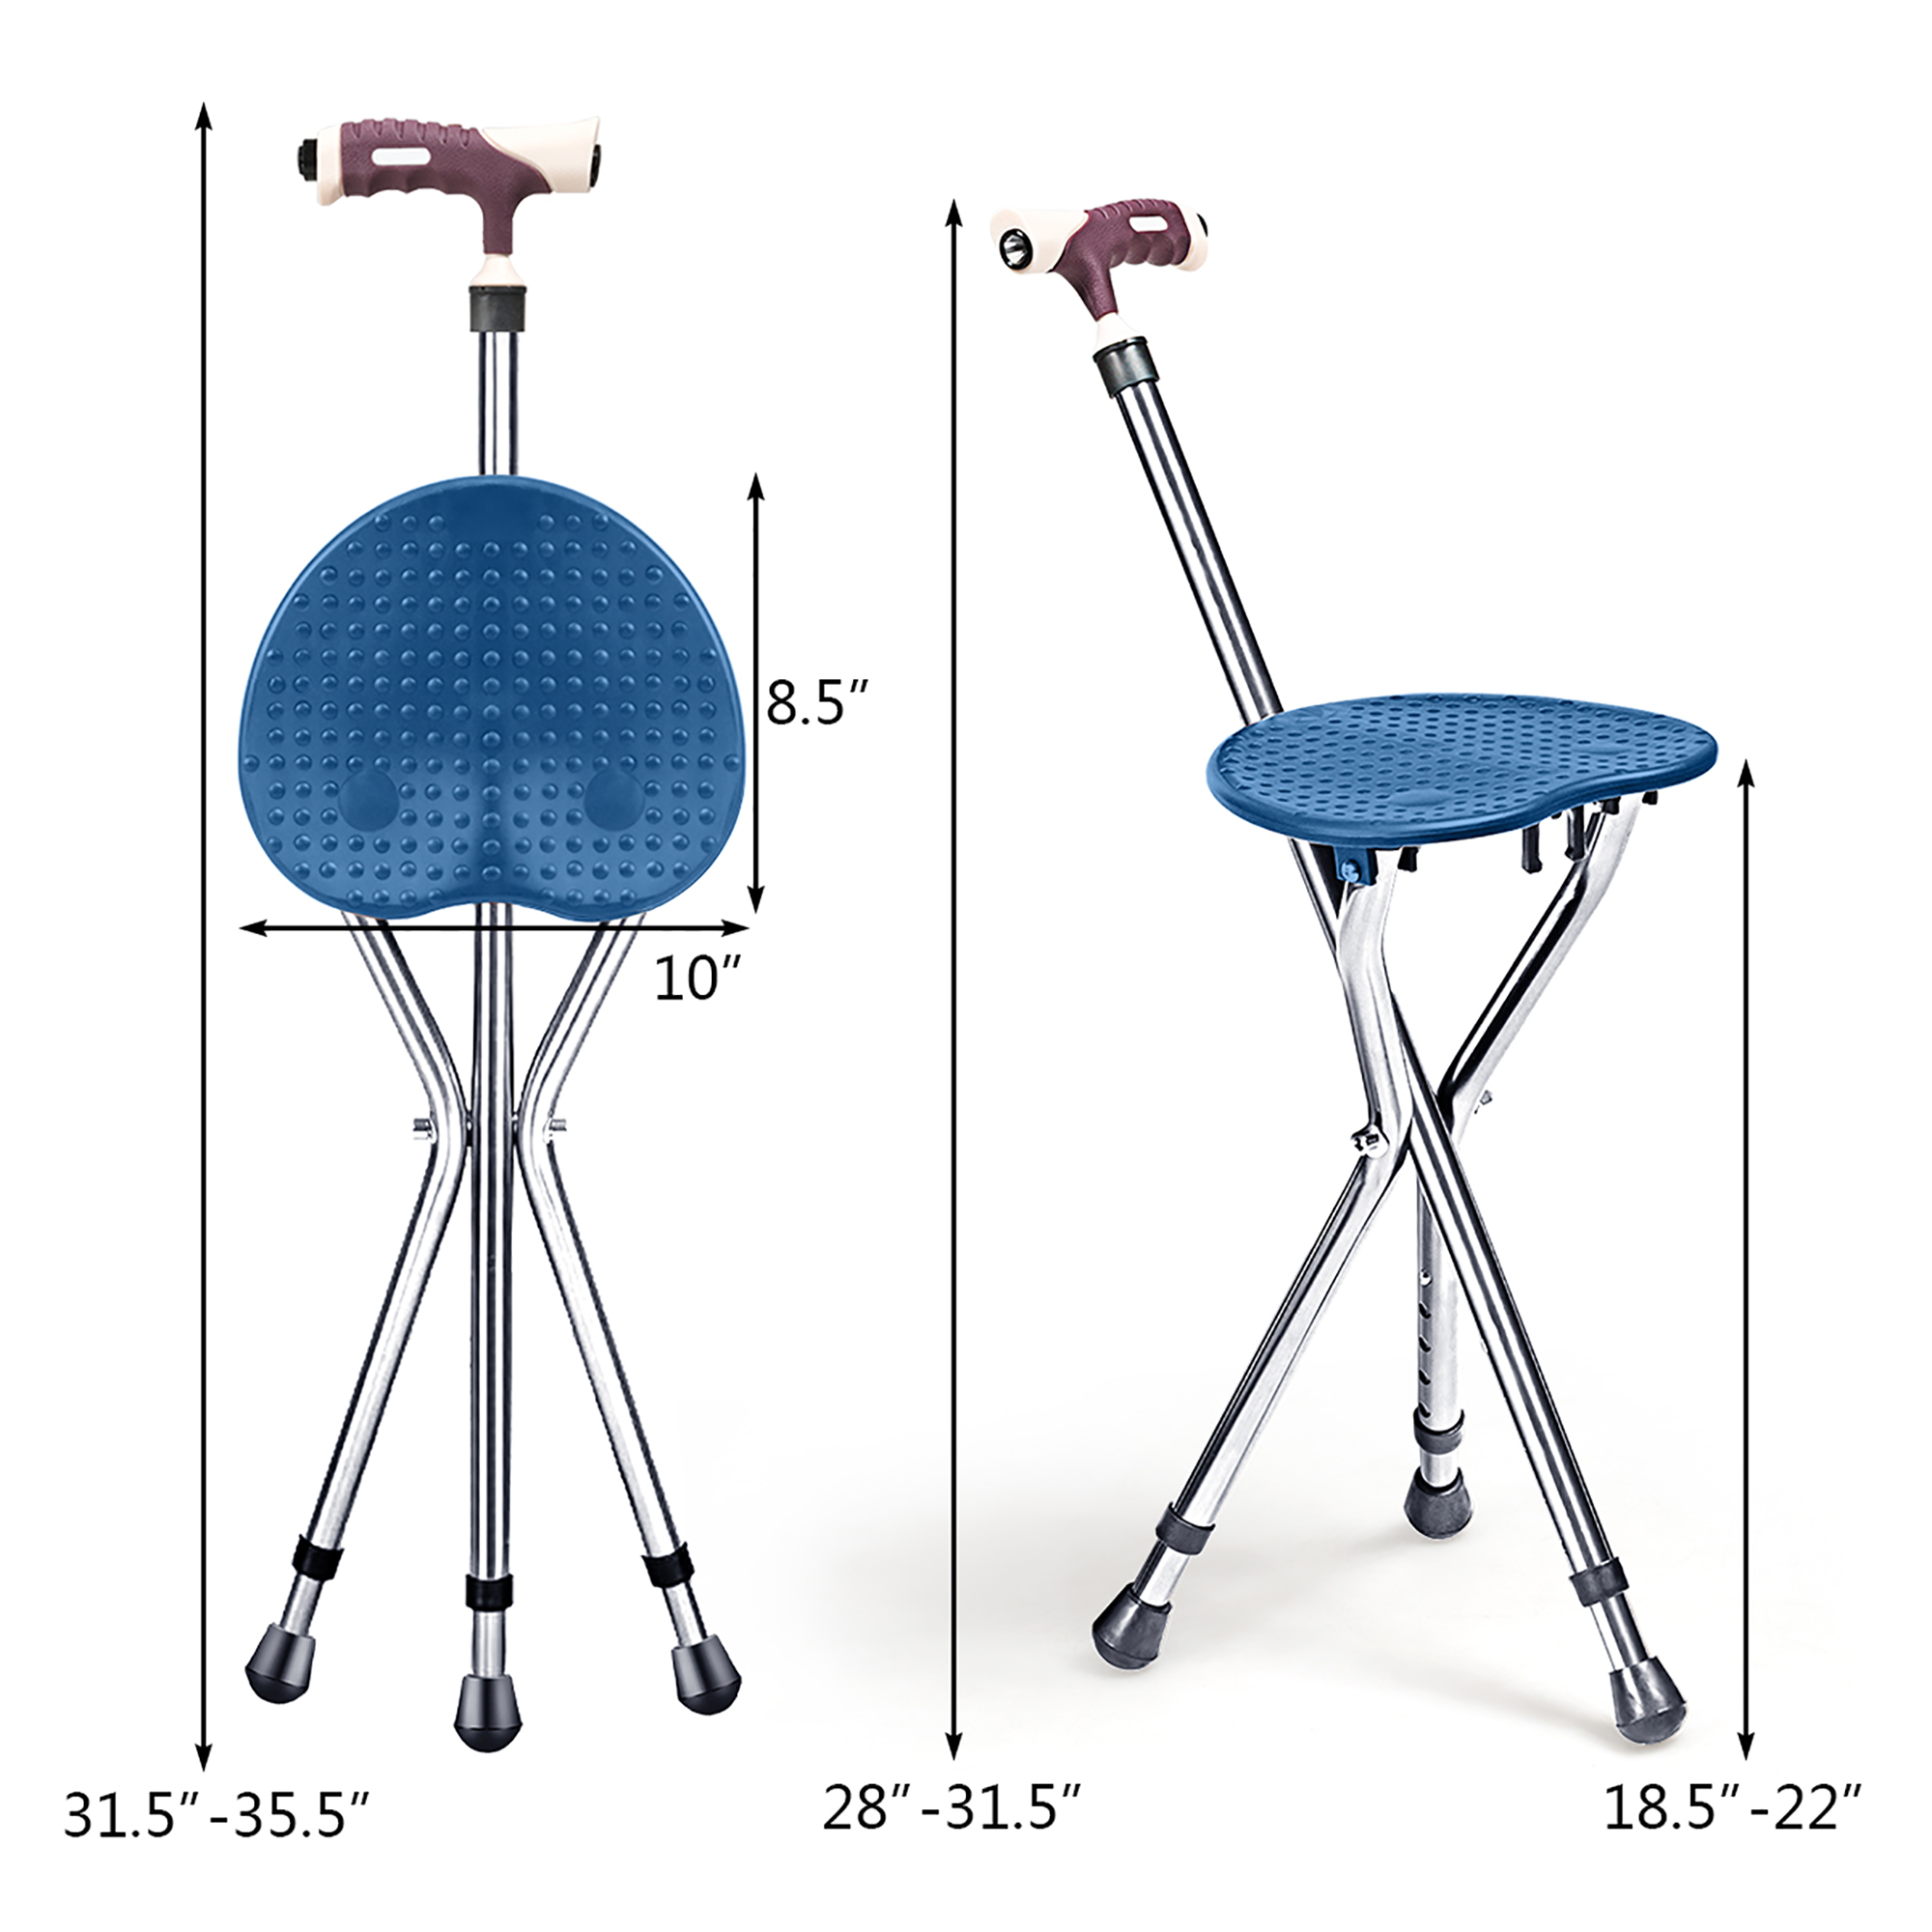 Goplus Adjustable Folding Cane Outdoor Seat Stool Aluminum Alloy Crutch Chair with Light Blue - image 3 of 10